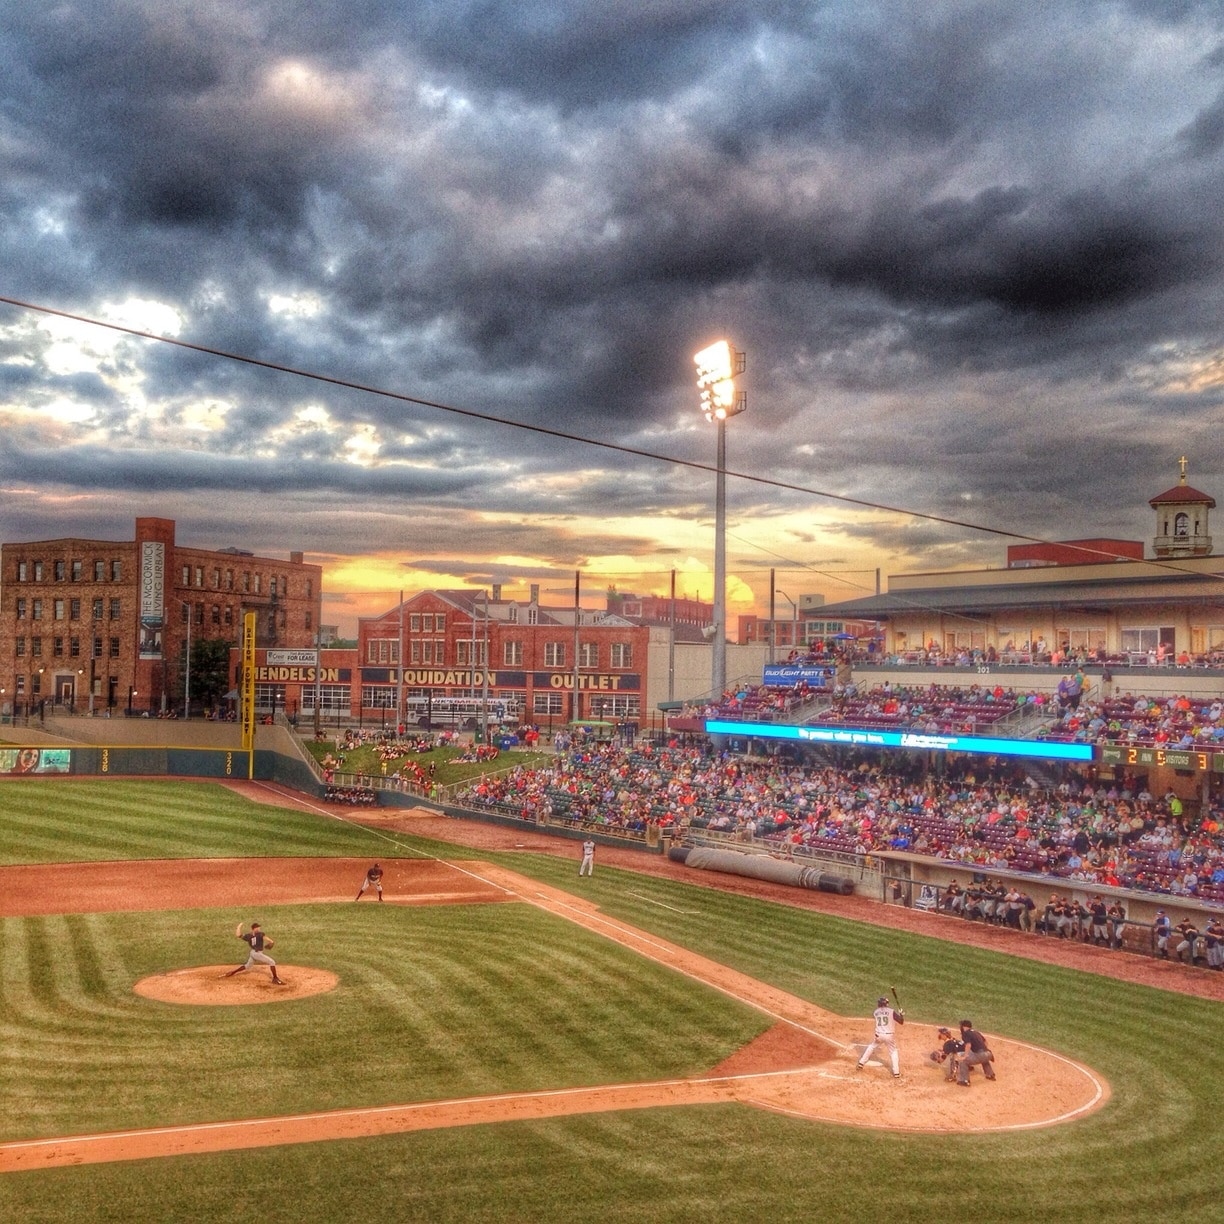 The Dayton Dragons are a farm team for the Cincinnati Reds.  It's minor leagues, so it's way cheaper and just as much fun.